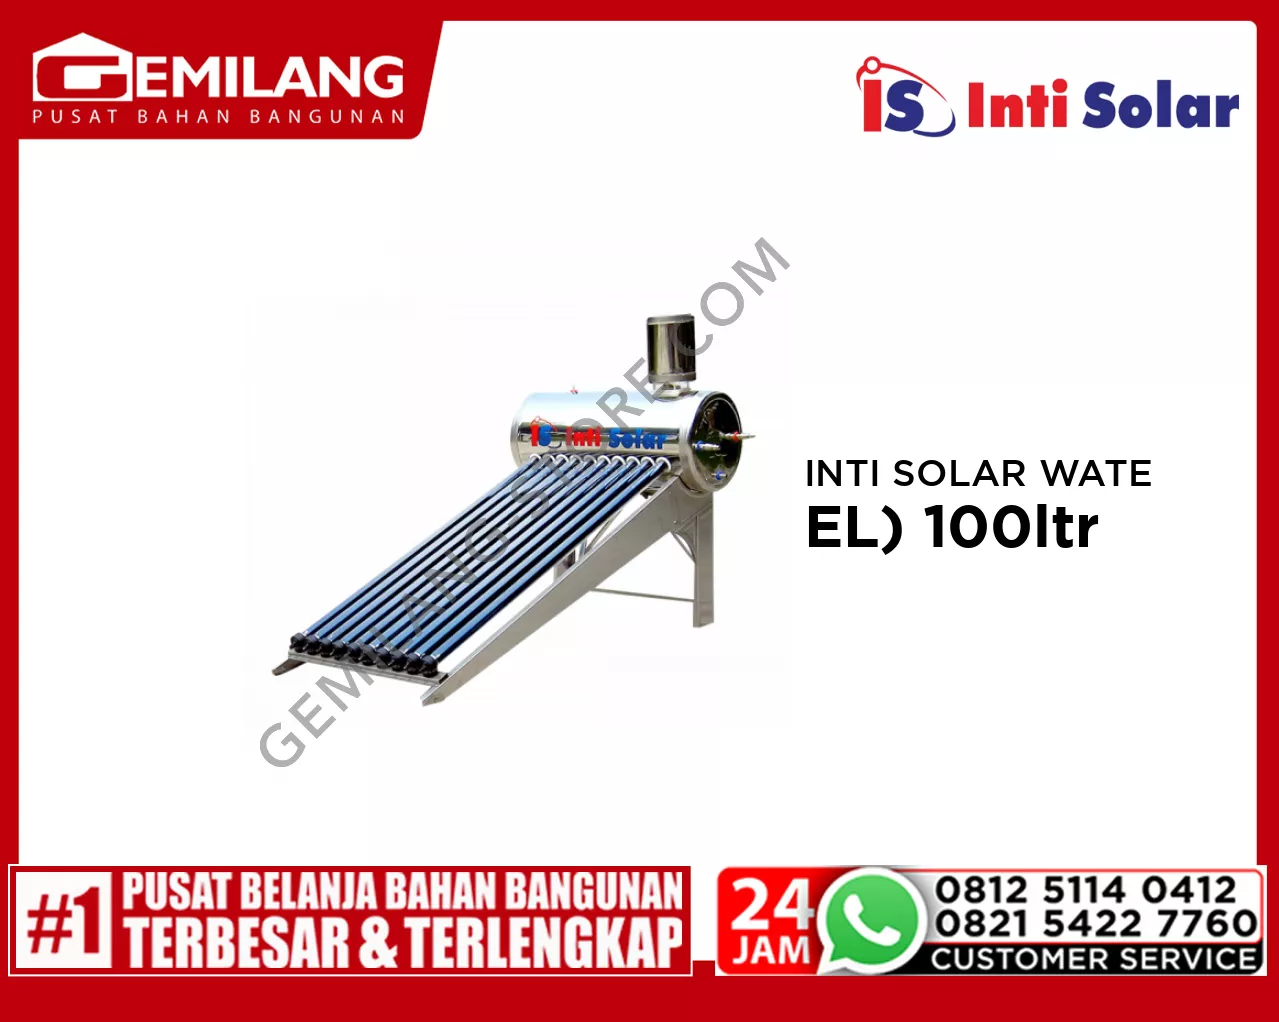 INTI SOLAR WATER HEATER 10 IN ( STAINLESS STEEL) 100ltr